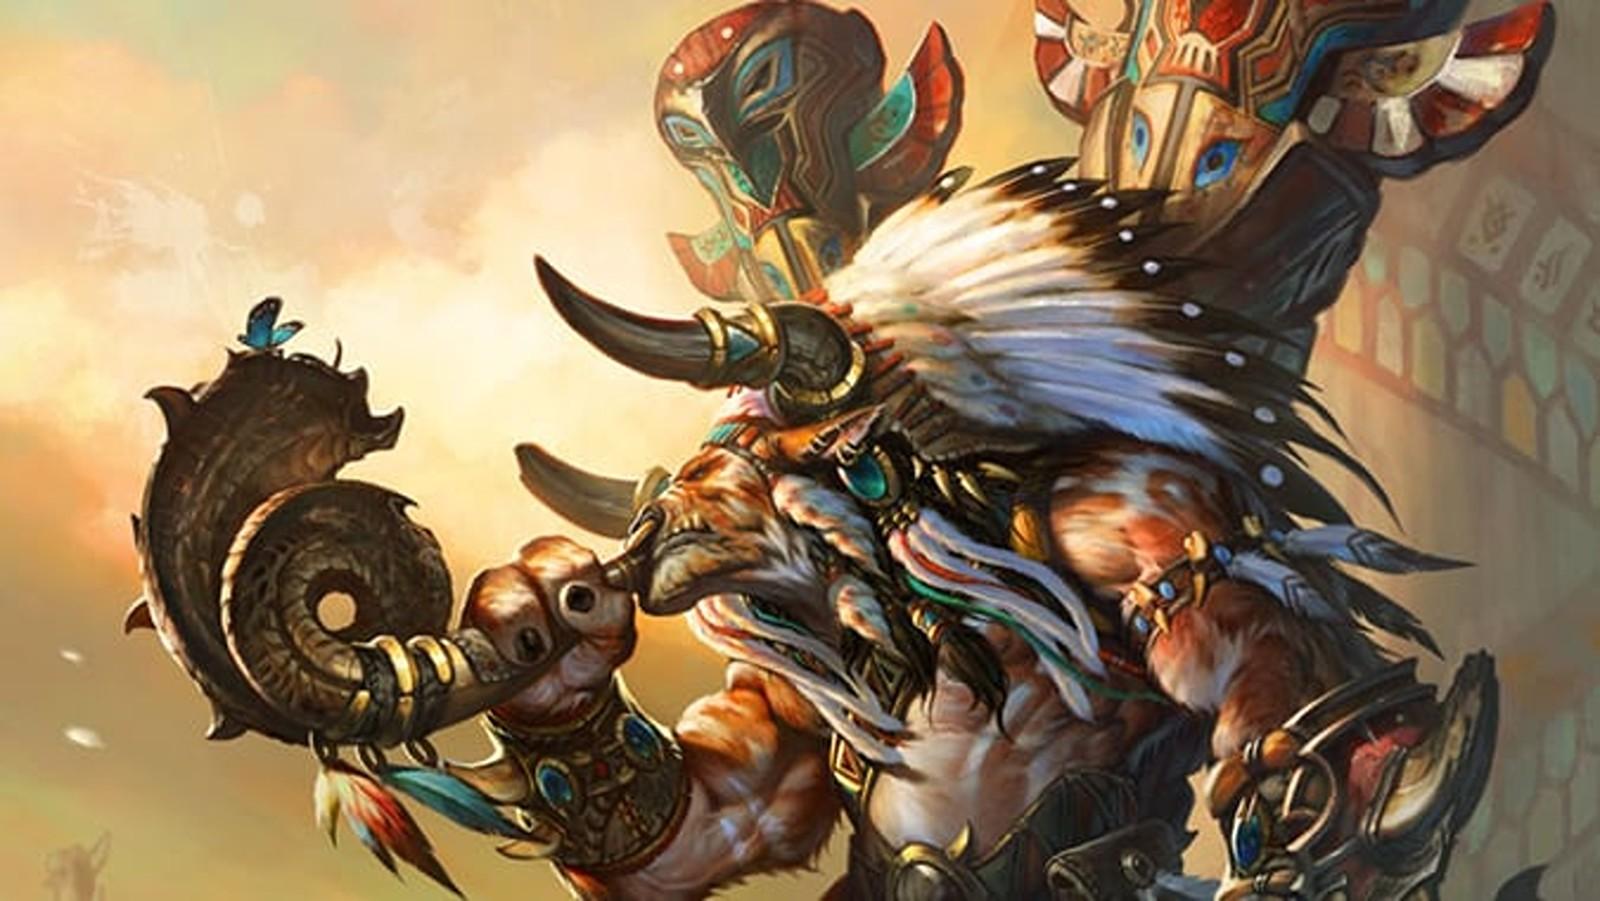 Baine Bloodhoof is a Warrior in World of Warcraft